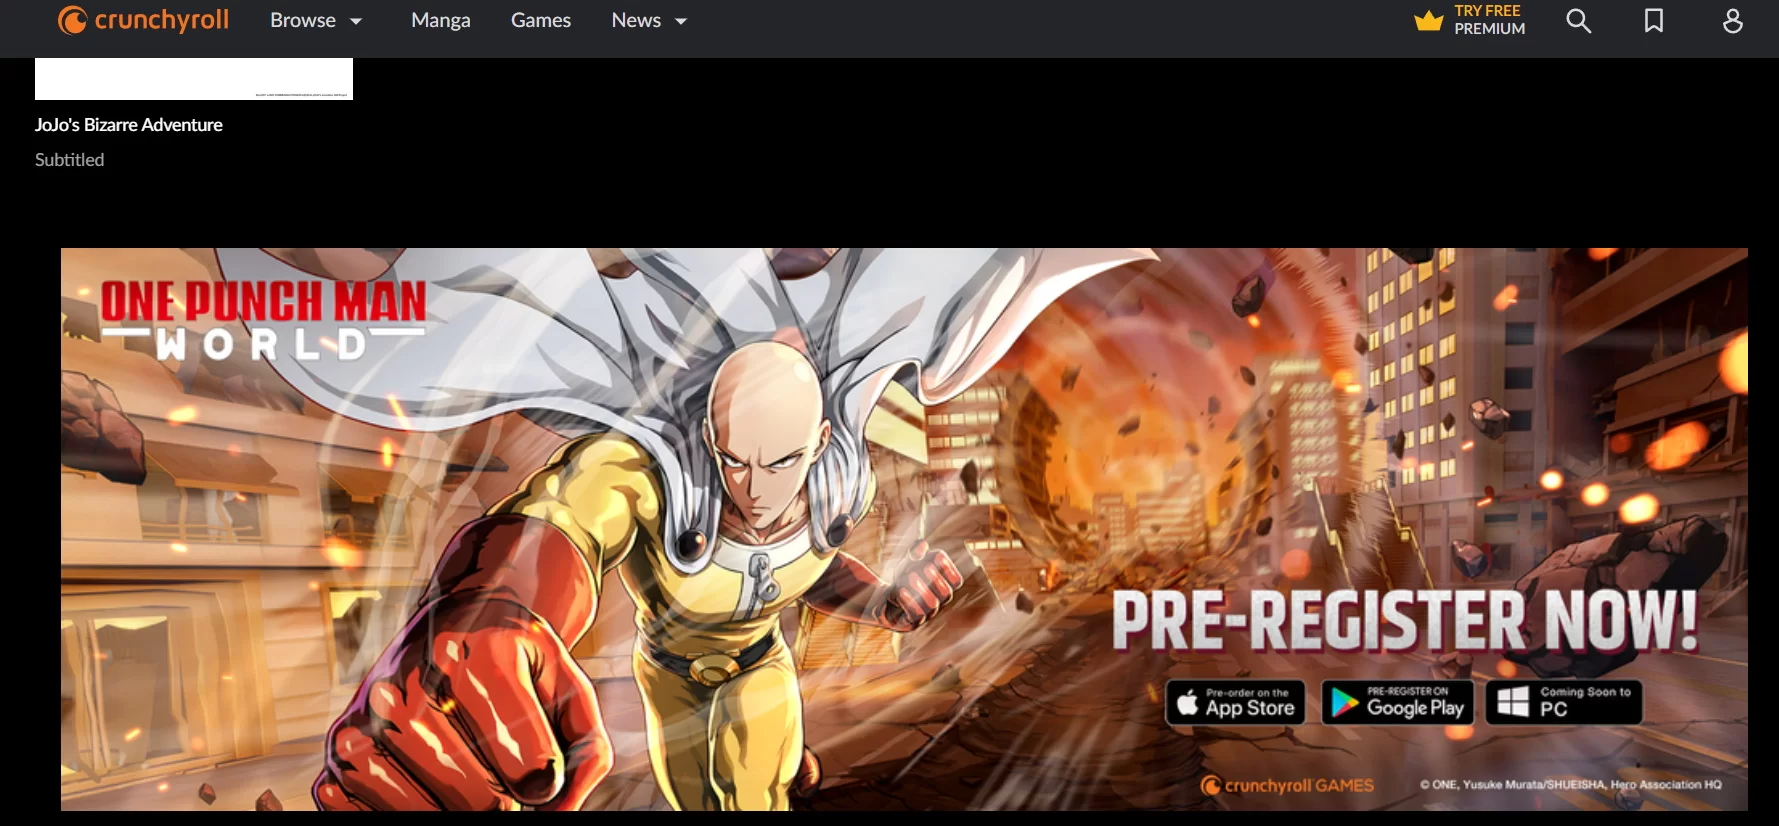 A promotional banner on Crunchyroll's website for "One Punch Man World" game, urging users to pre-register on various platforms.